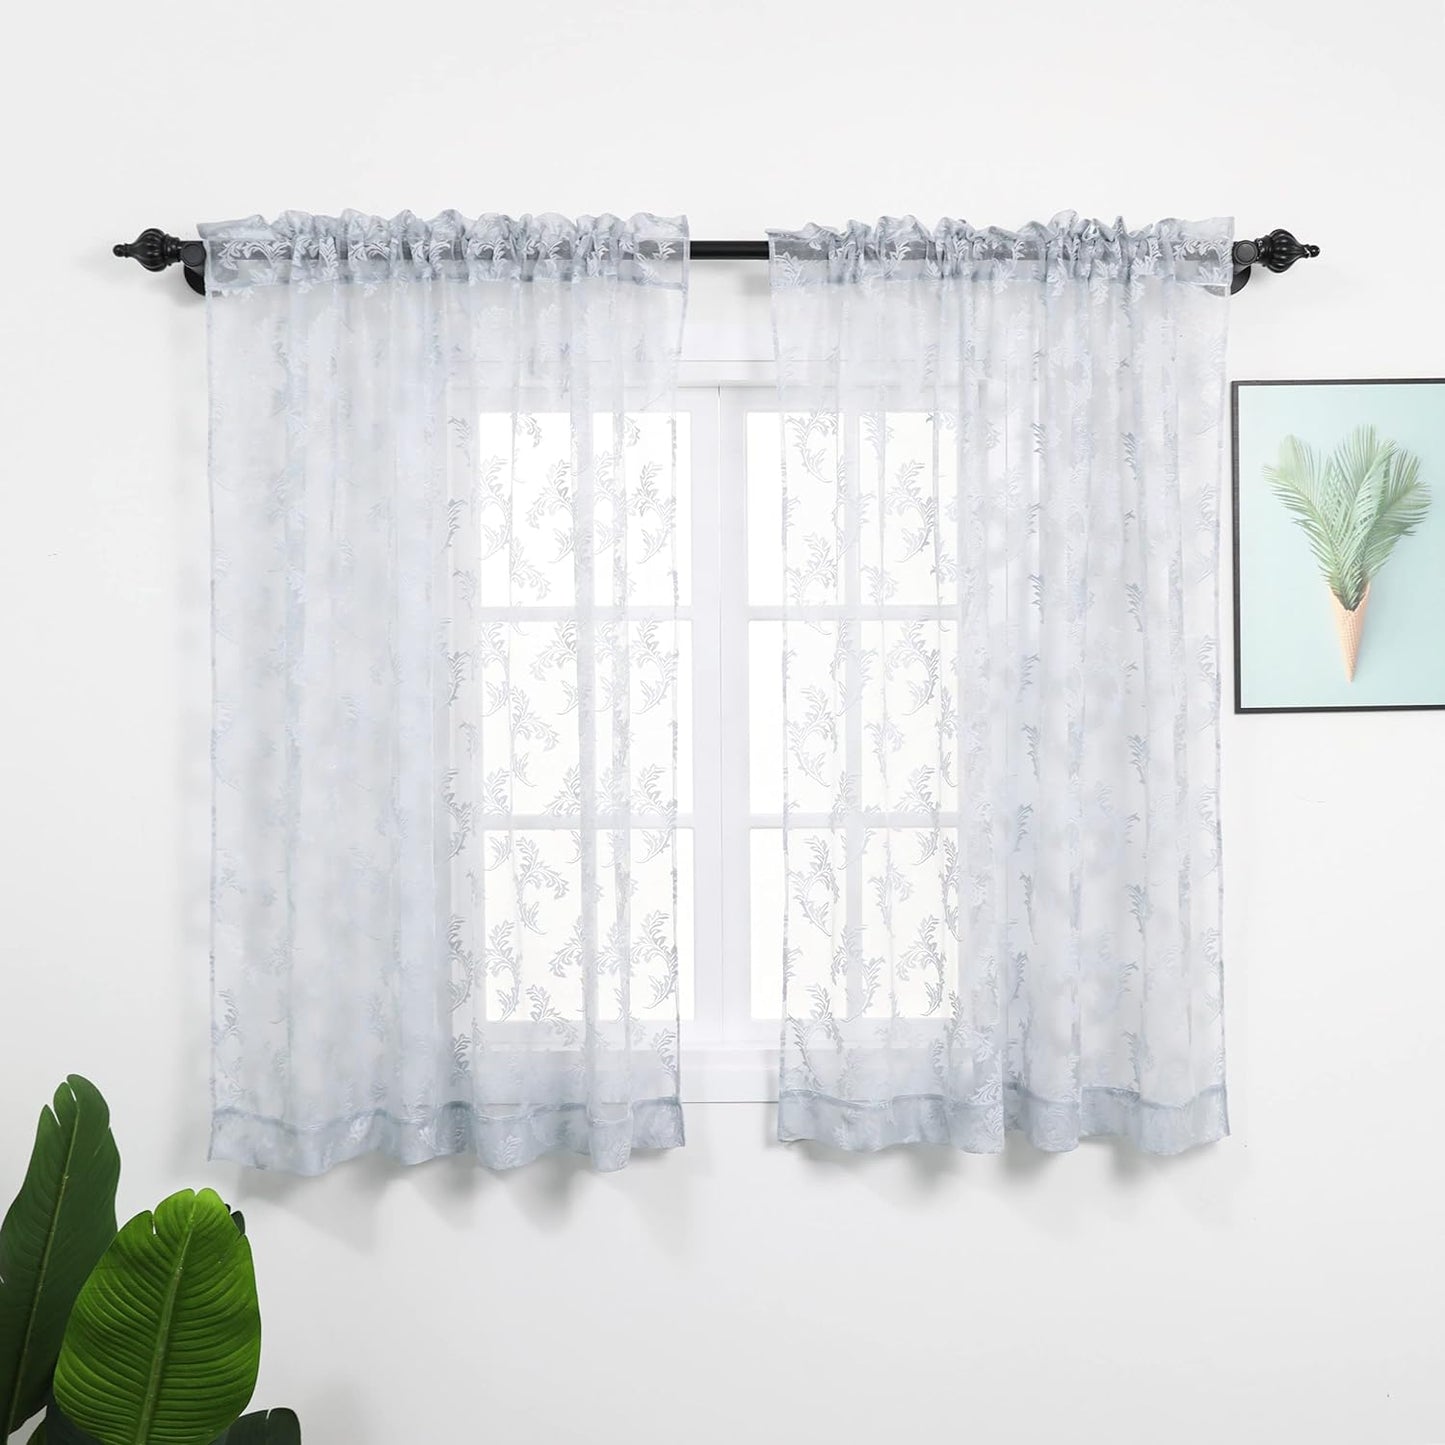 Rloncomix Grey Sheer Curtains Decorative Leaves Knitted Textured Rod Pocket Semi Light Filtering Airy Window Drapes for Bedroom Kitchen, 52 X 63 Inch, 2 Panels  BAIHT HOME Grey 52"W X 45"L | 2 Pcs 